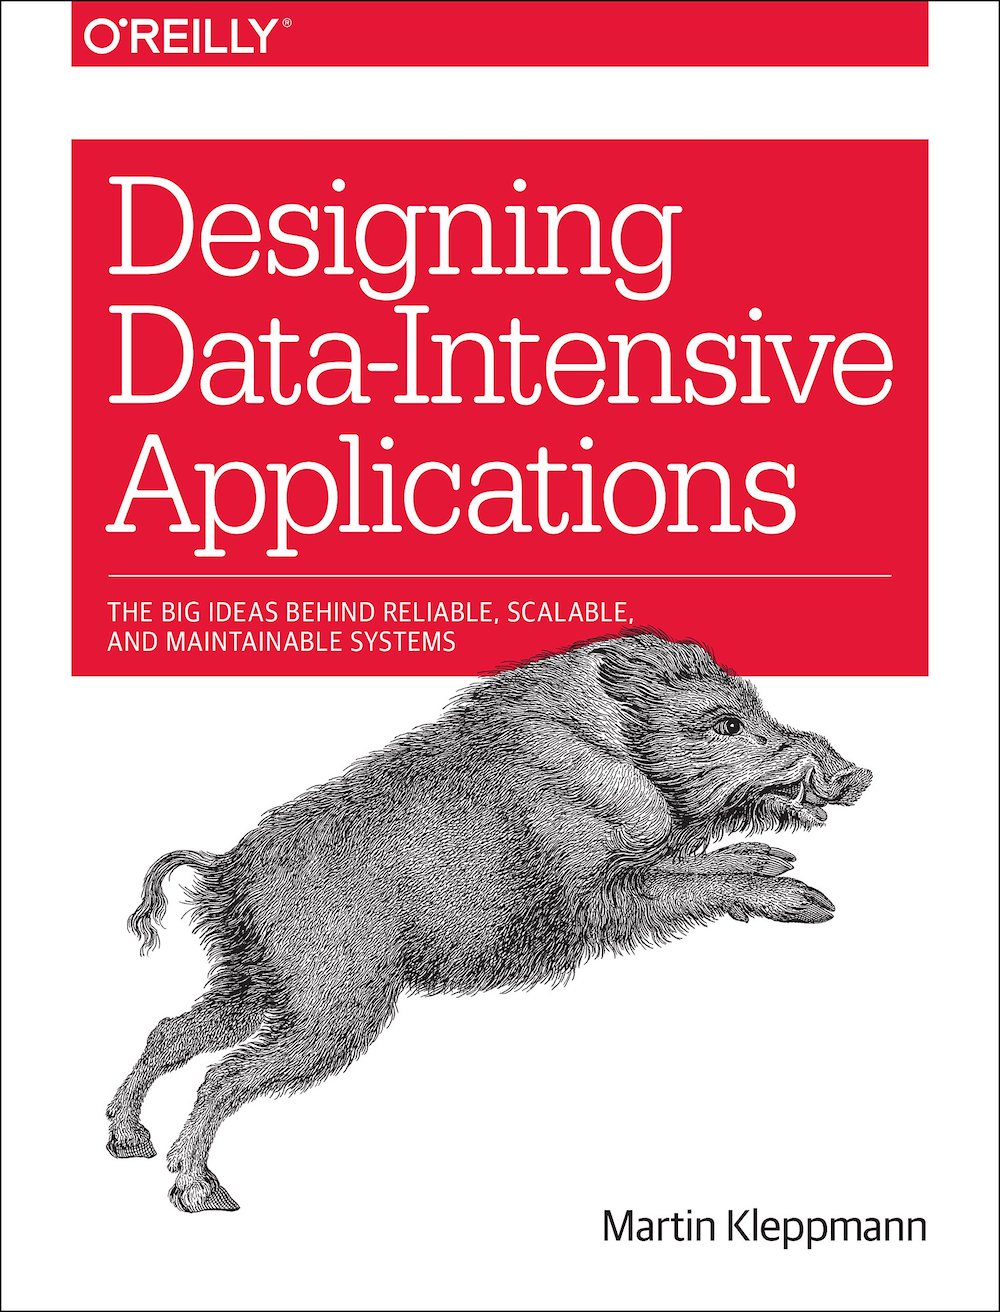 Designing Data-Intensive Applications - Chapter 1 - Reliable, Scalable, and Maintainable Applications